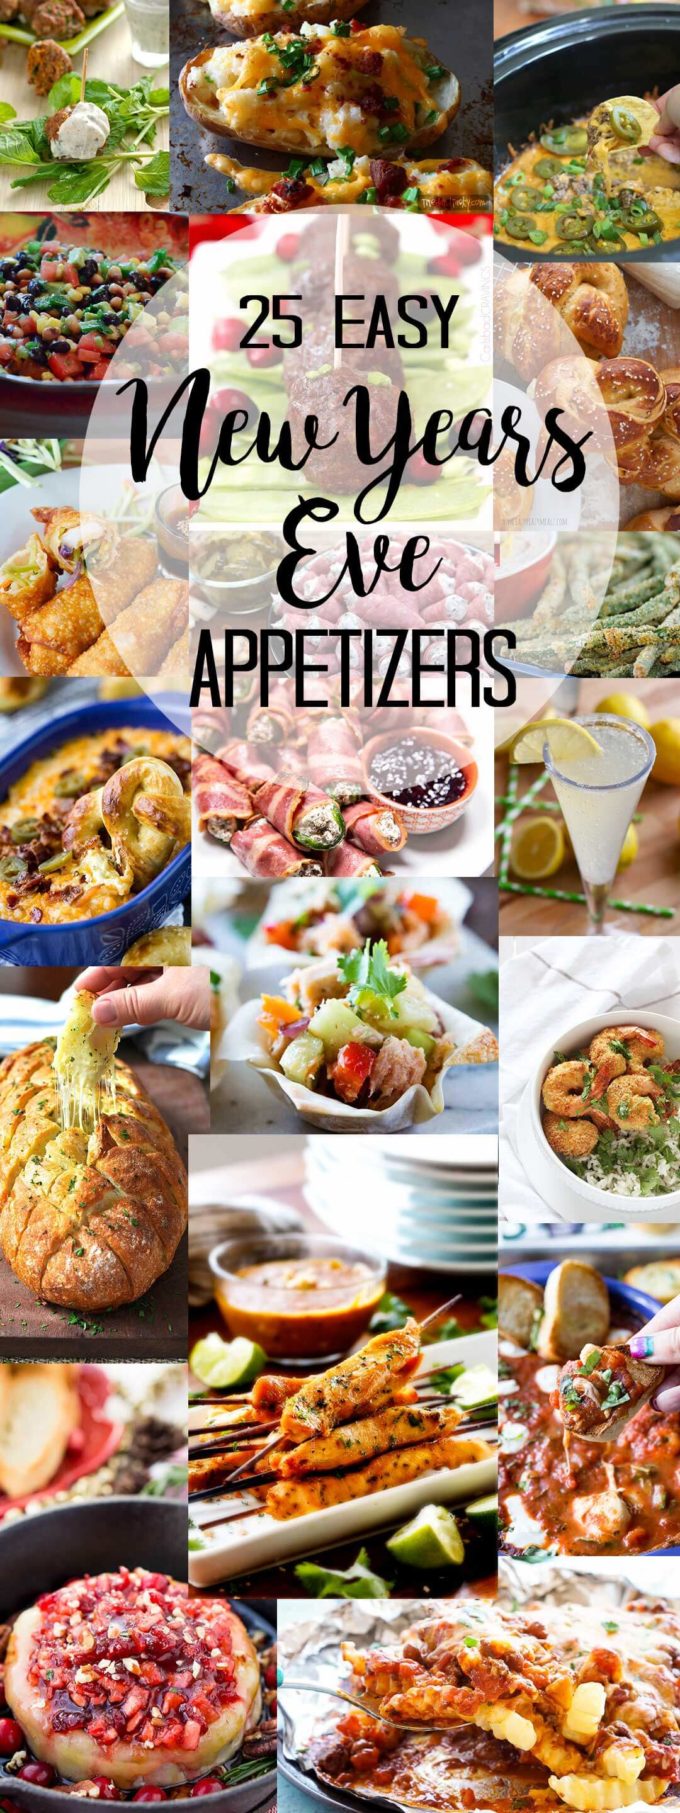 New Year's Eve Appetizers sure to make your mouth water!